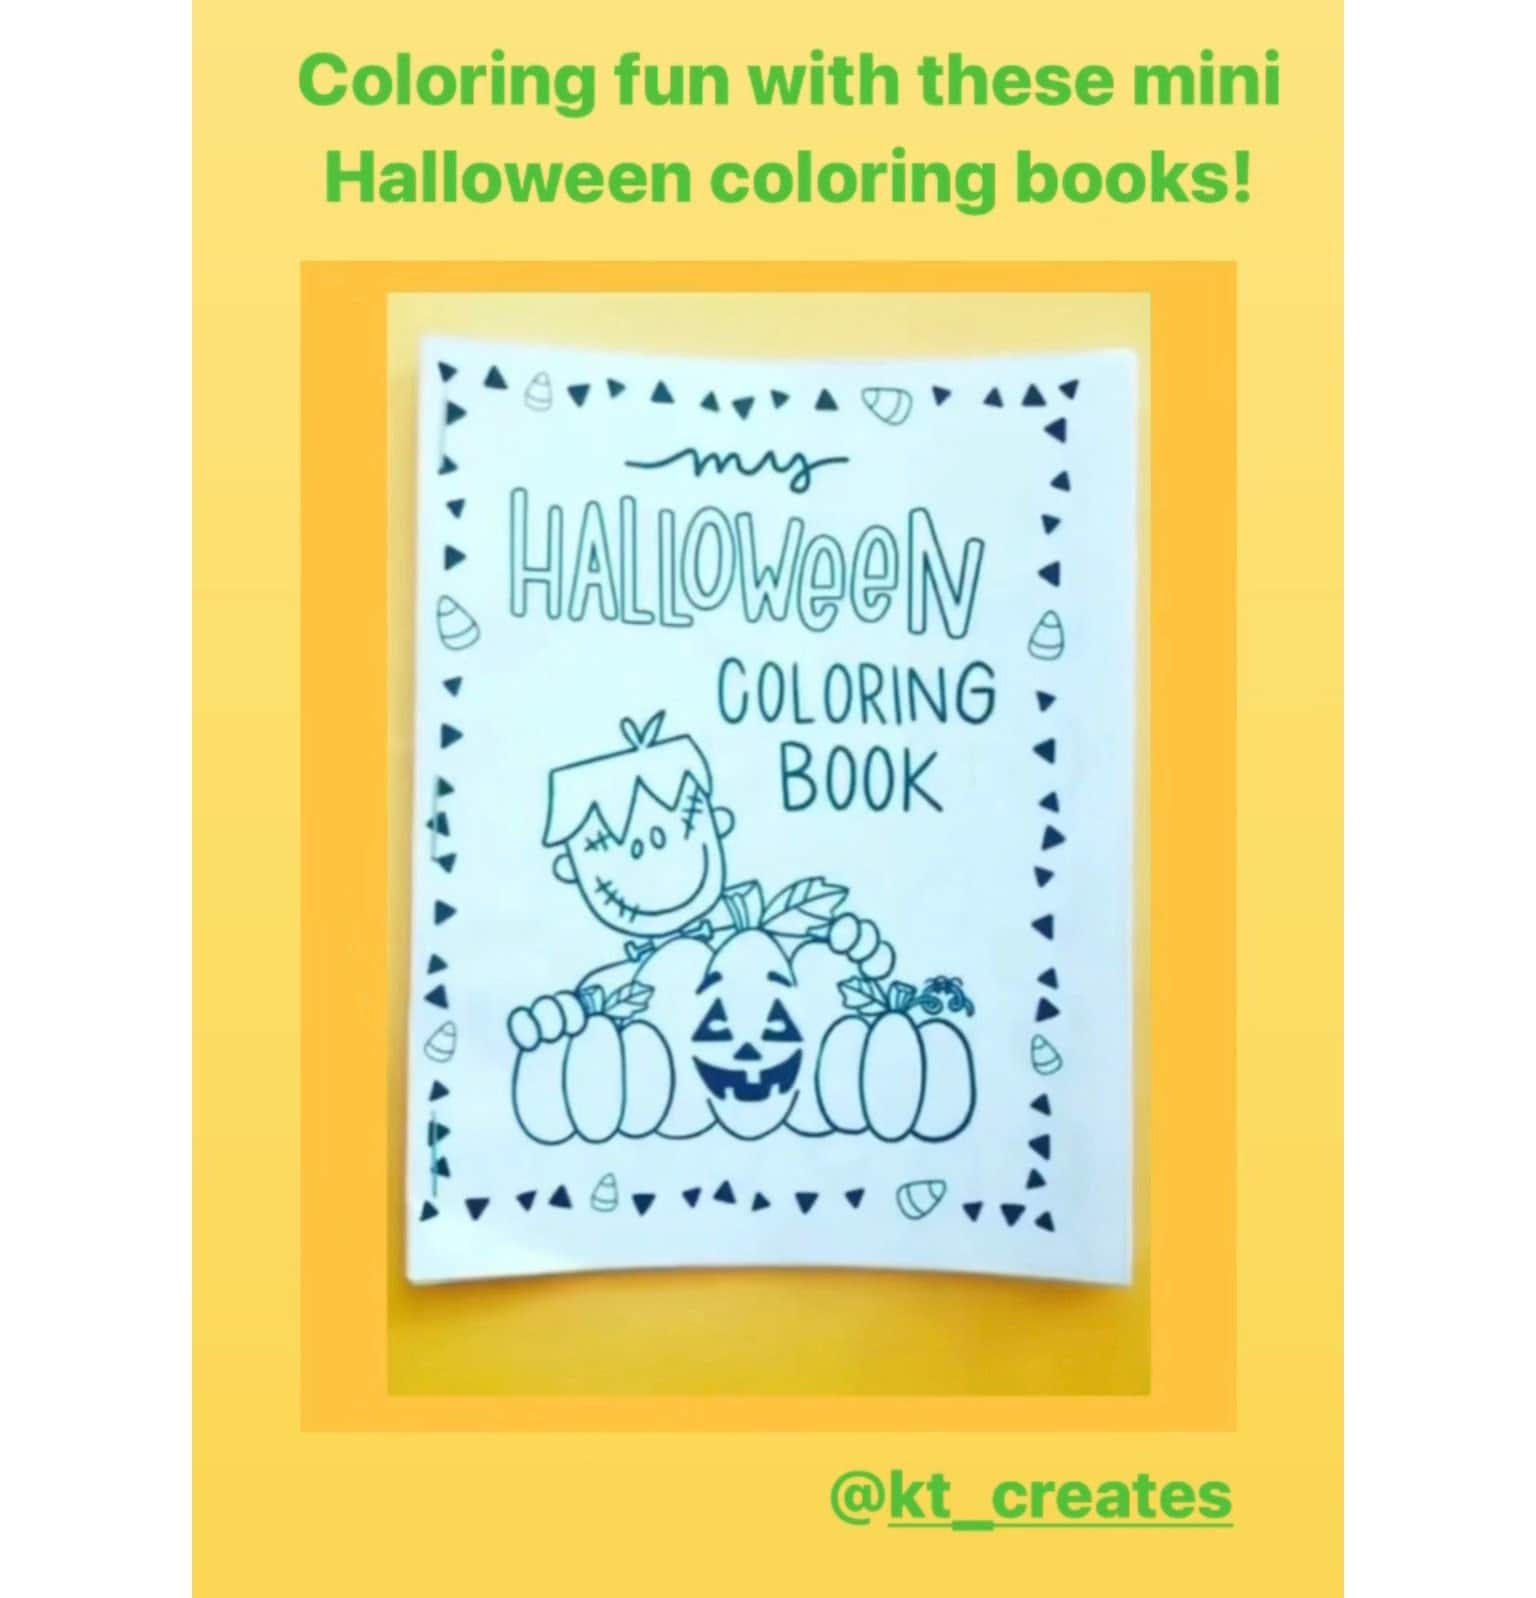 Halloween Coloring Book, Coloring Books for Adults, Coloring Books